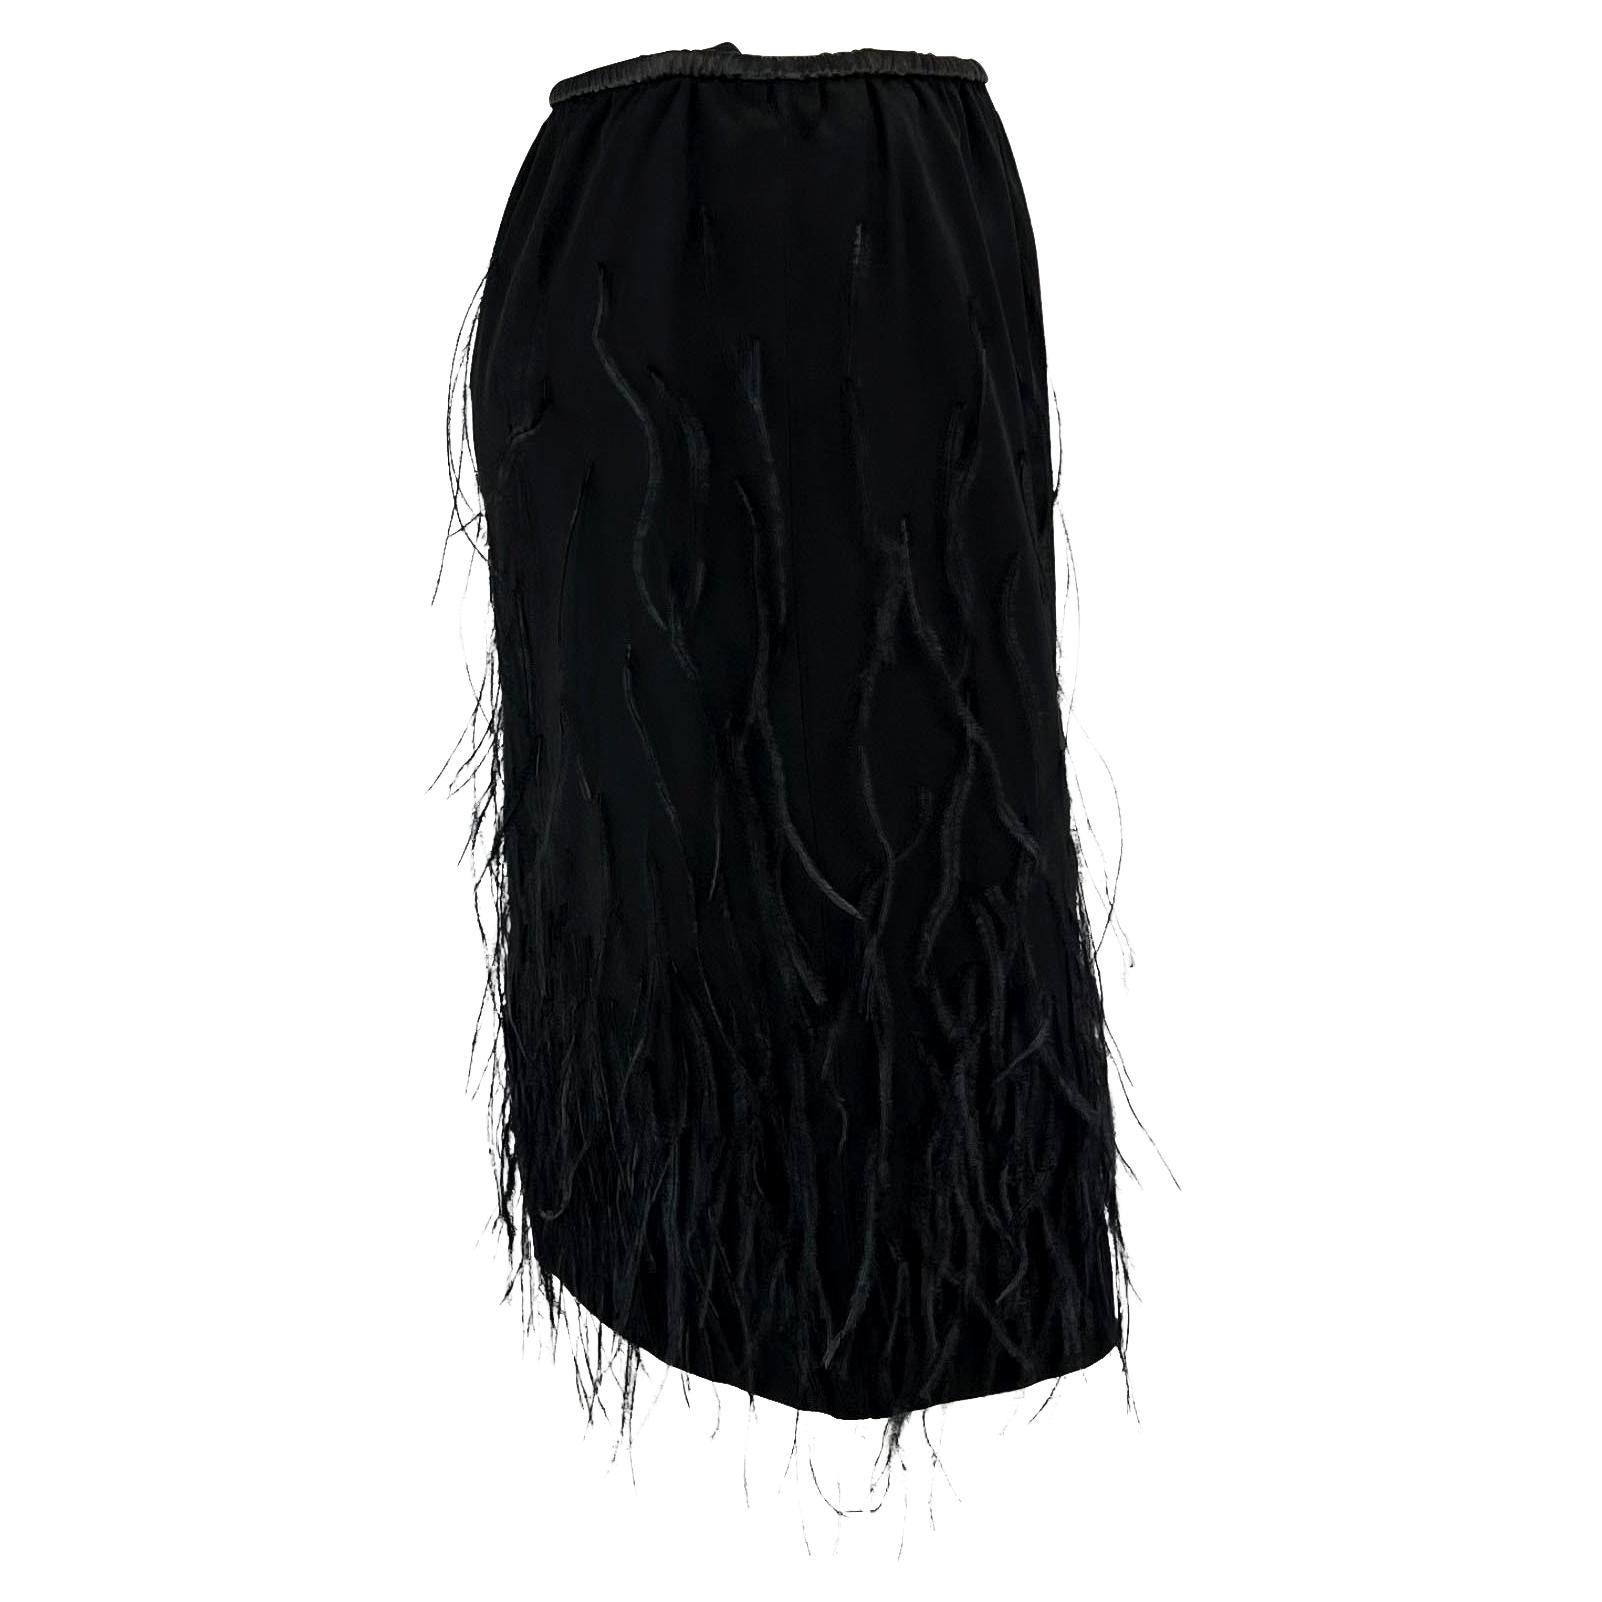 S/S 1999 Gucci by Tom Ford Black Silk Ostrich Feather Leather Band Skirt For Sale 2